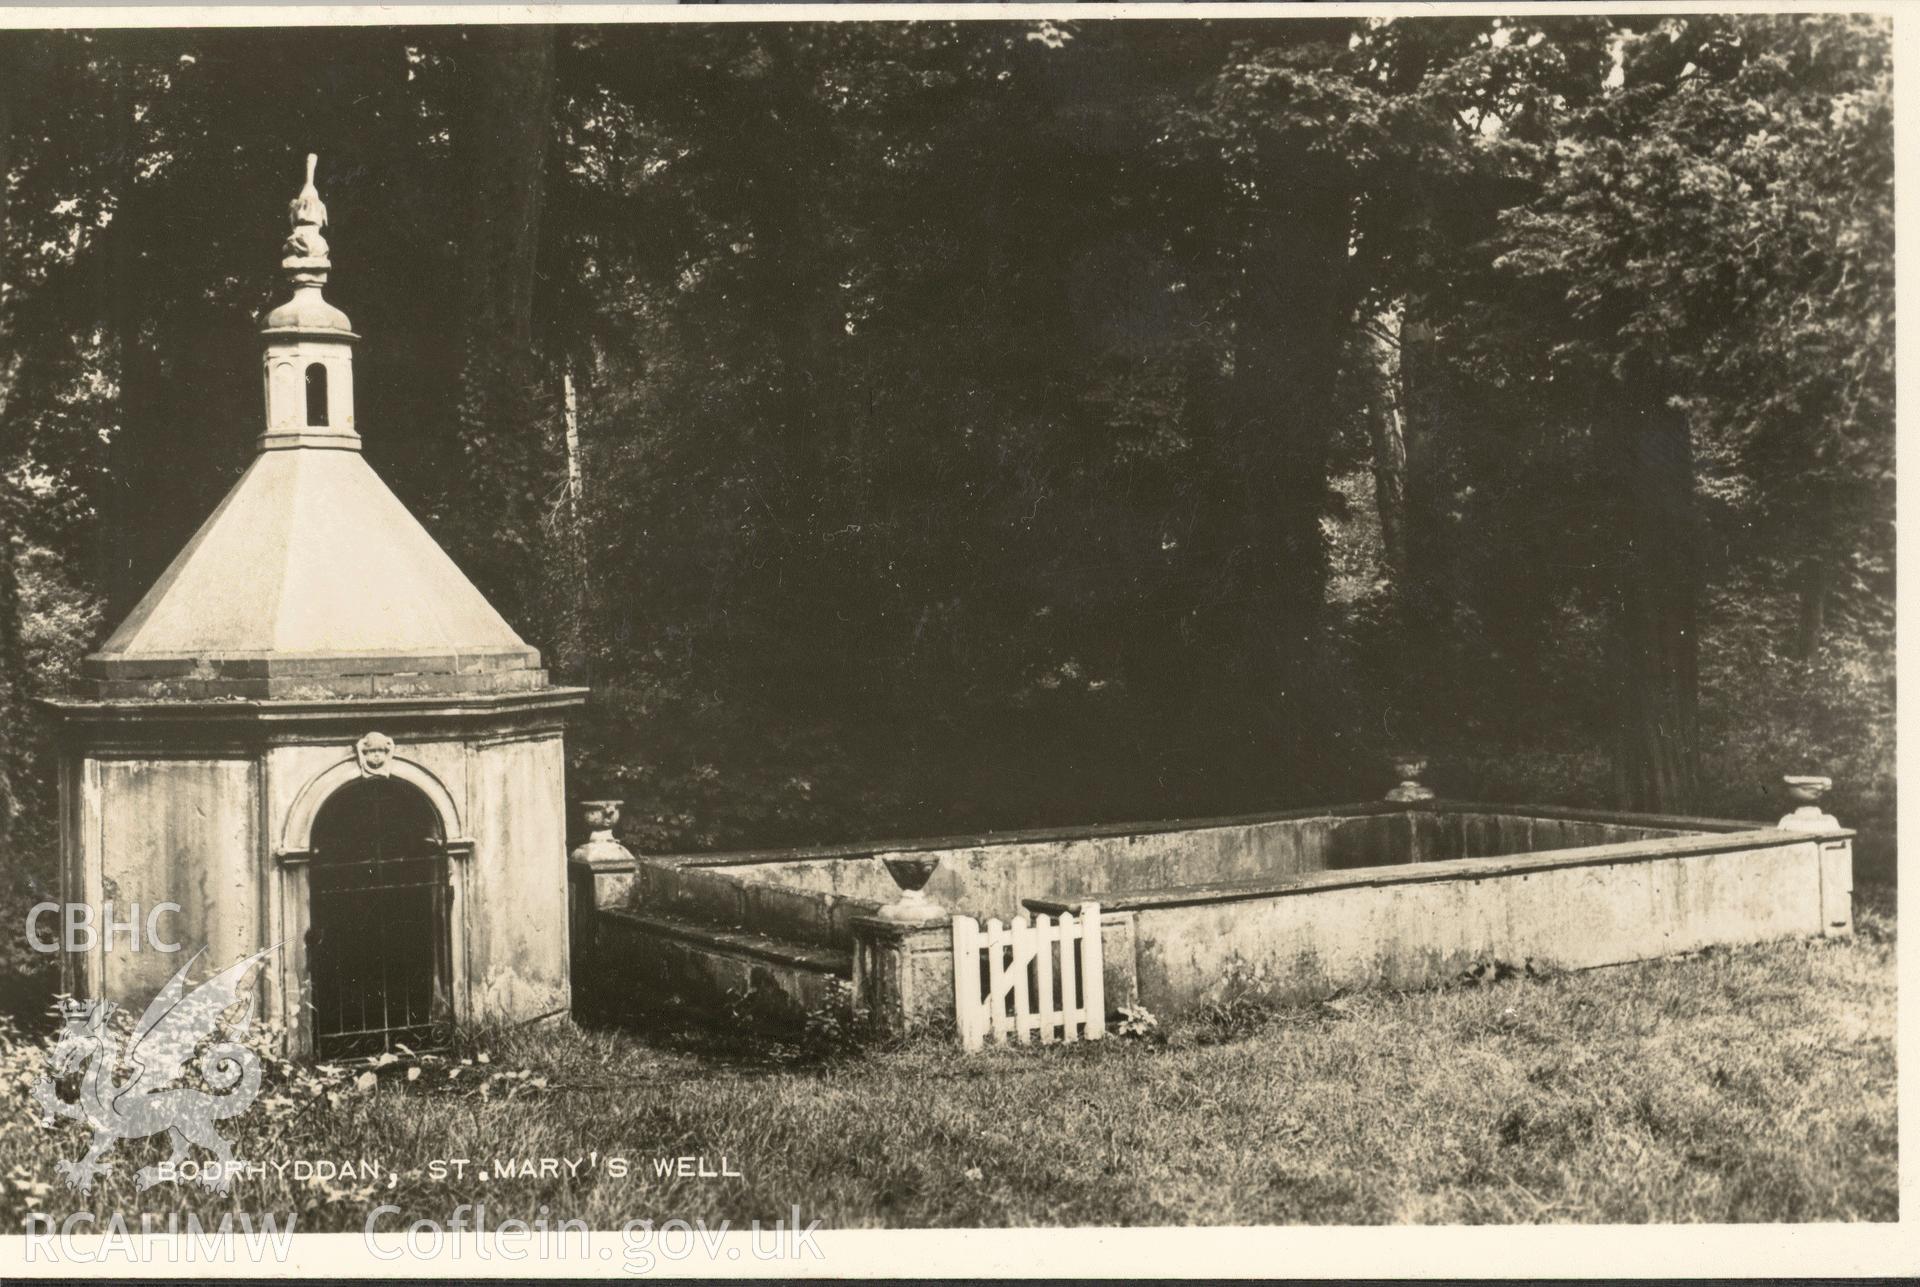 Digitised postcard image of St Mary's Well and Bath, Bodrhyddan Hall, National Buildings Record. Produced by Parks and Gardens Data Services, from an original item in the Peter Davis Collection at Parks and Gardens UK. We hold only web-resolution images of this collection, suitable for viewing on screen and for research purposes only. We do not hold the original images, or publication quality scans.